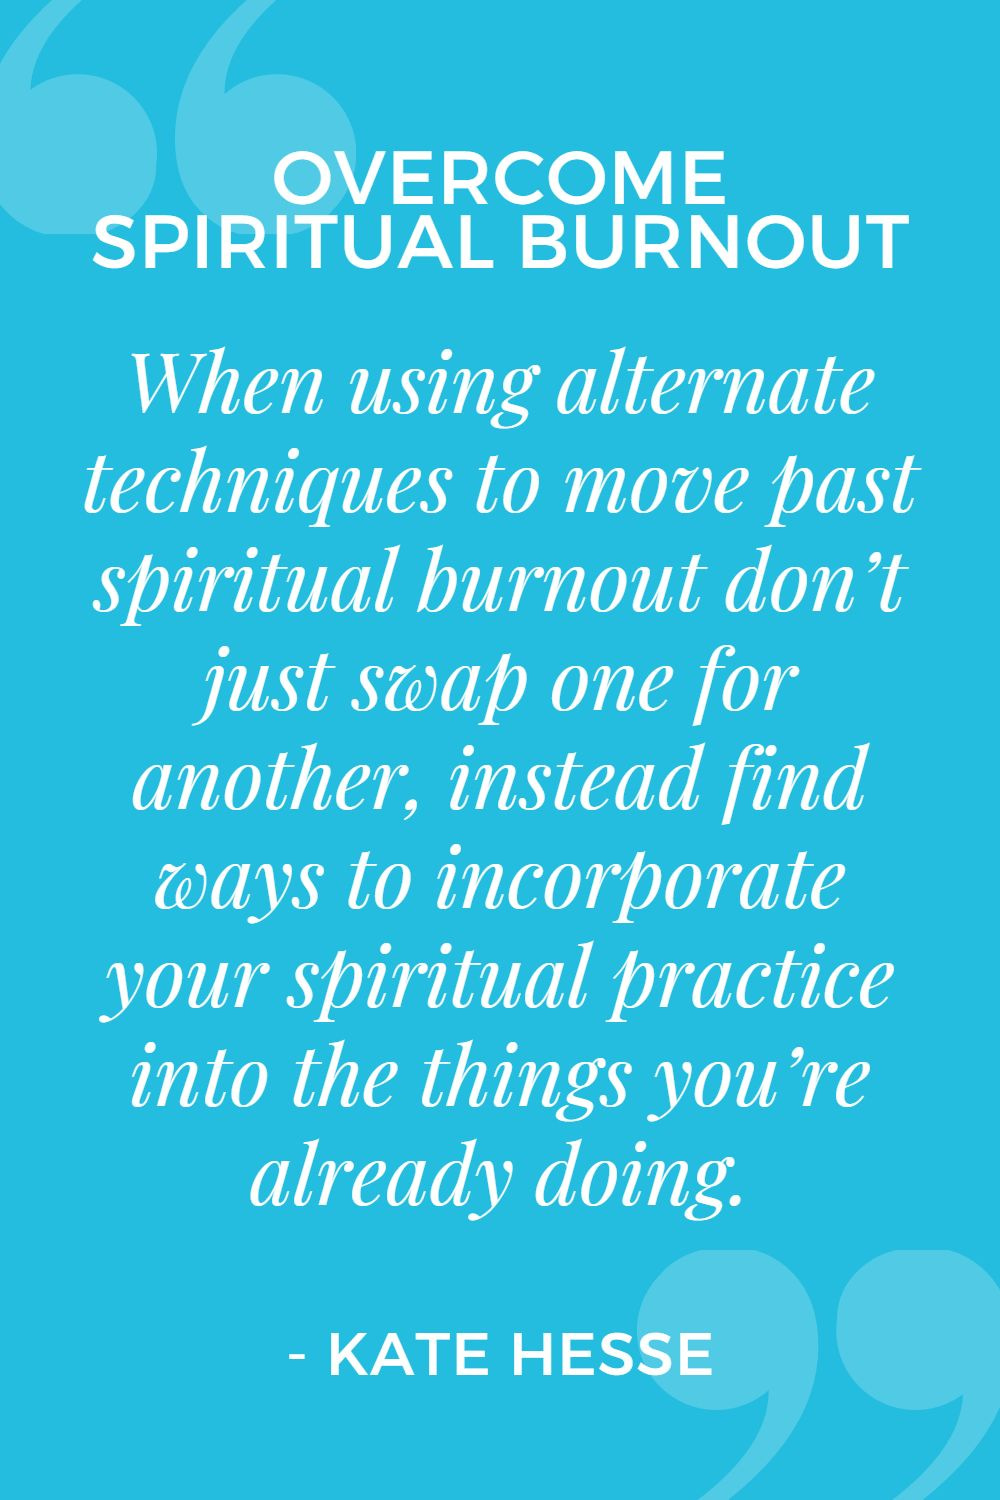 When using alternate techniques to move past spiritual burnout don't just swap one for another, instead find ways to incorporate your spiritual practice into the things you're already doing.